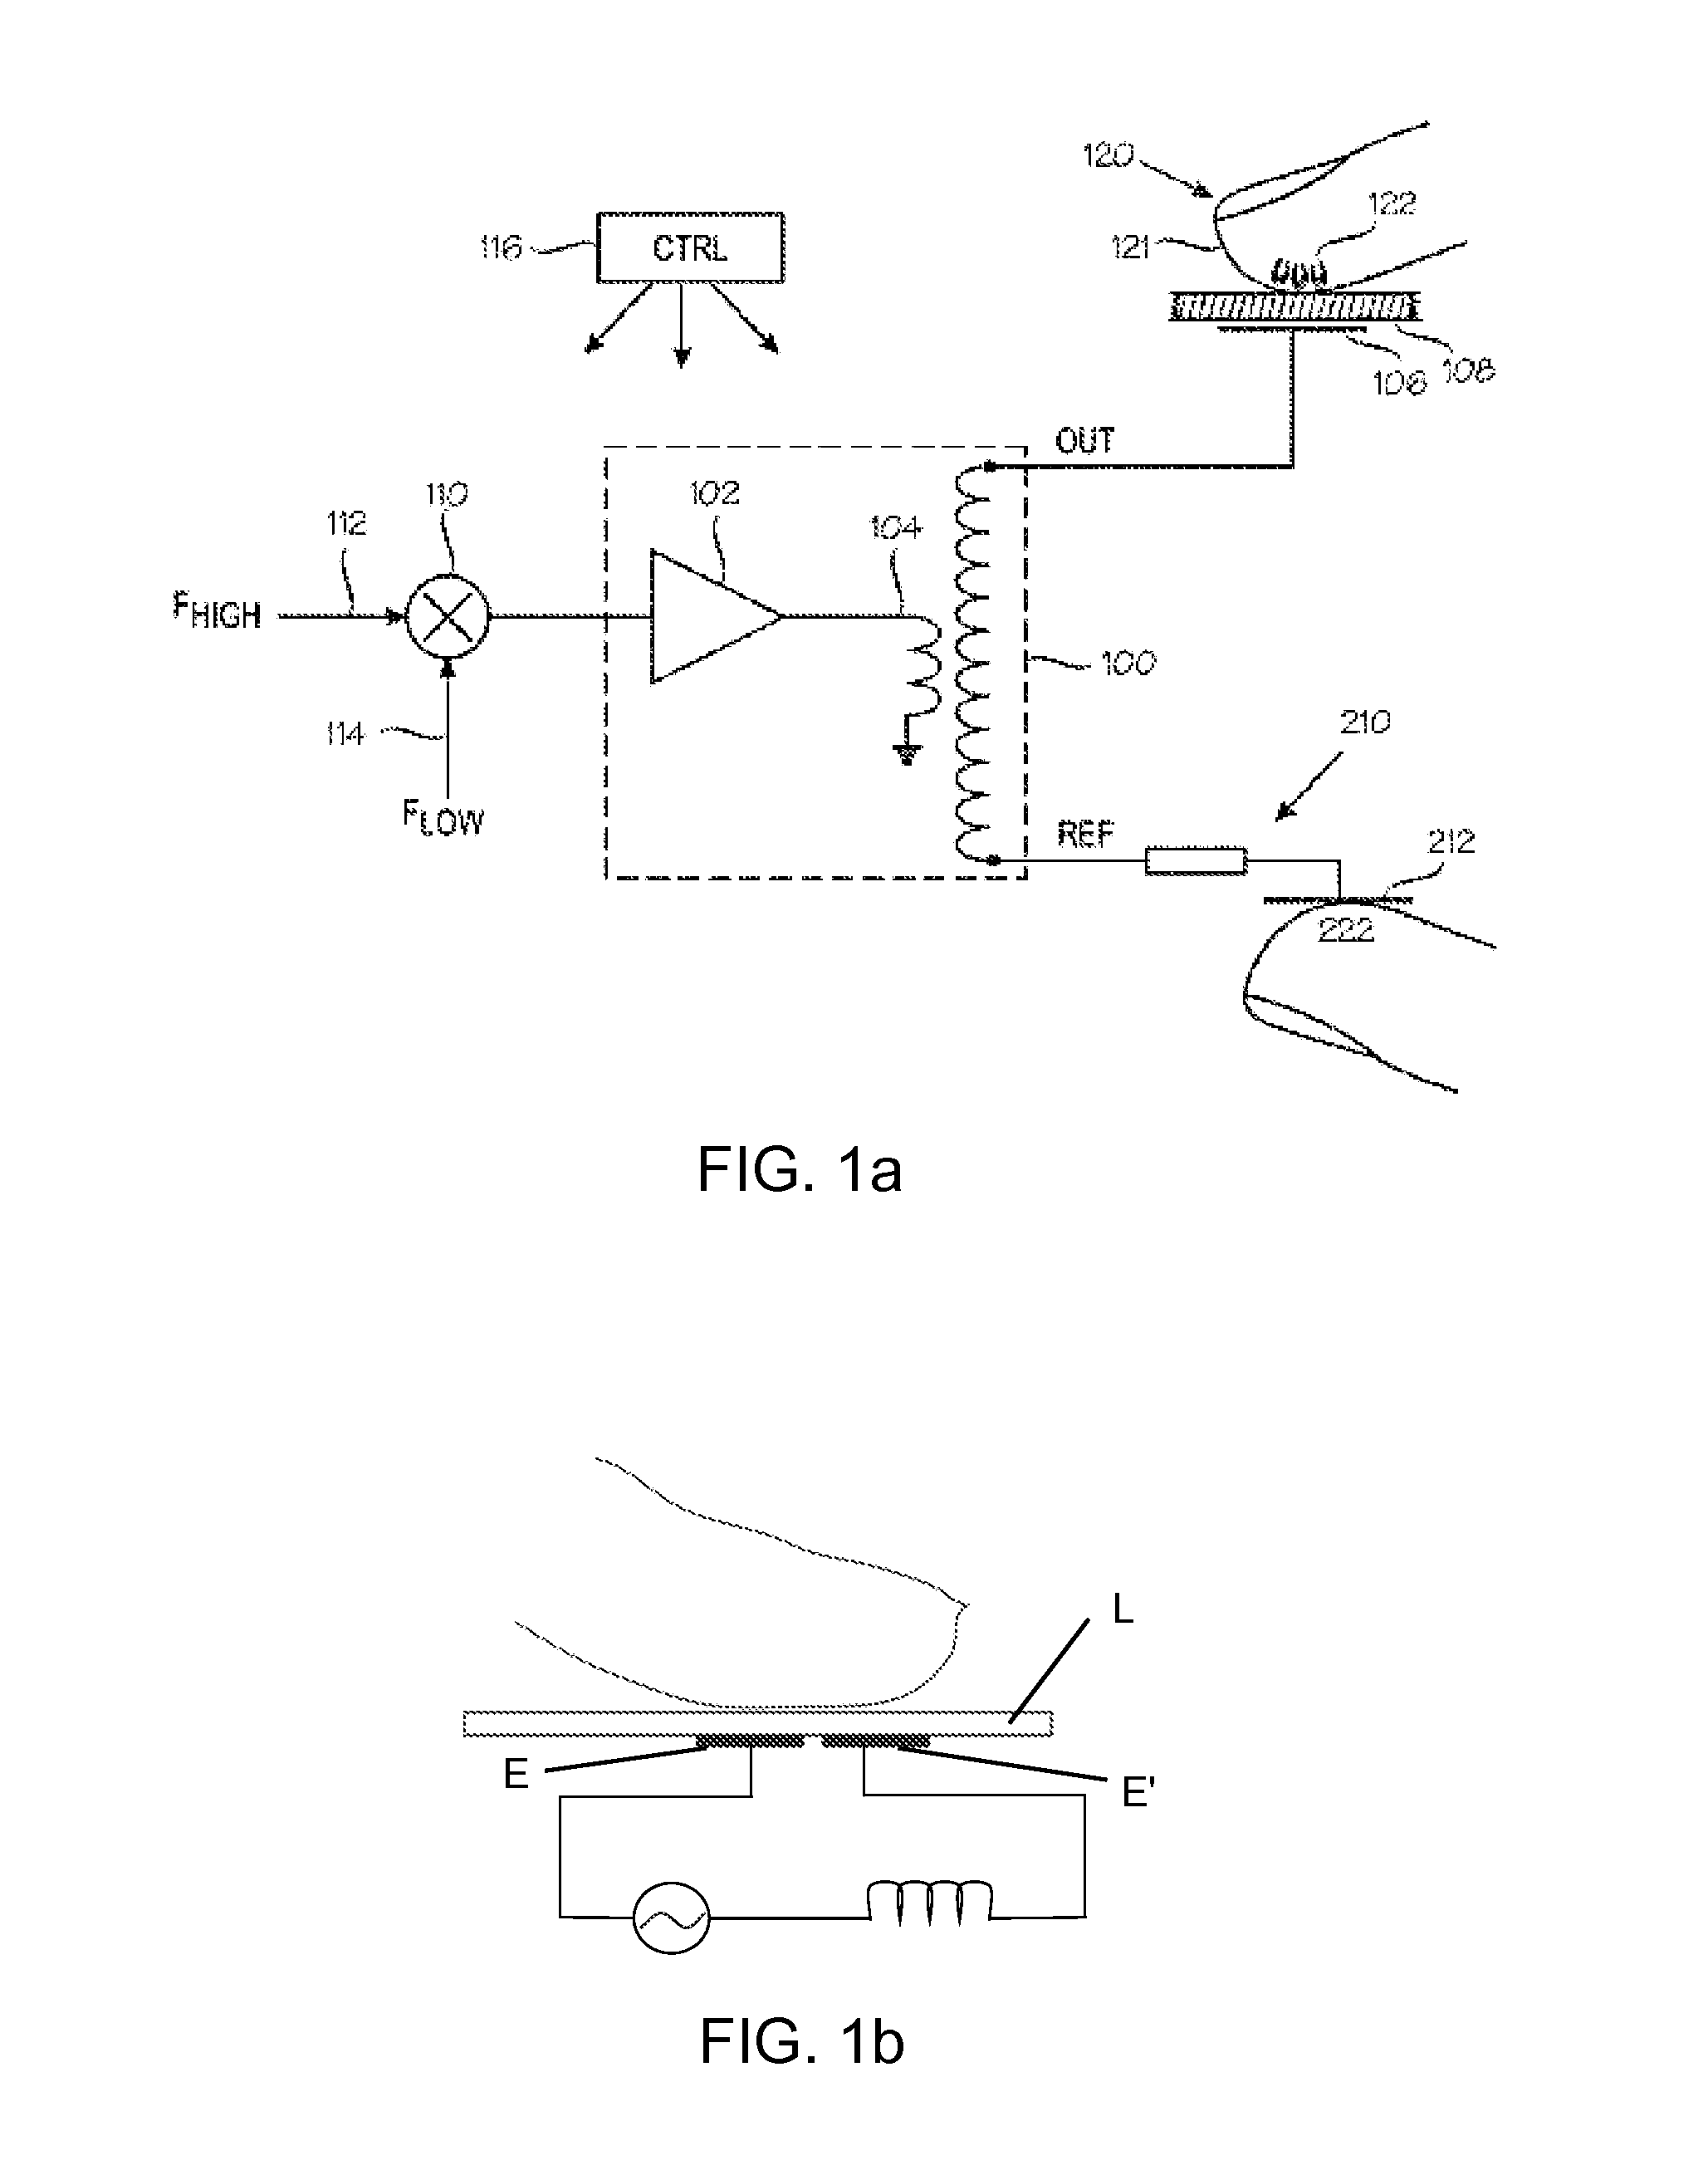 Electronic controller haptic display with simultaneous sensing and actuation